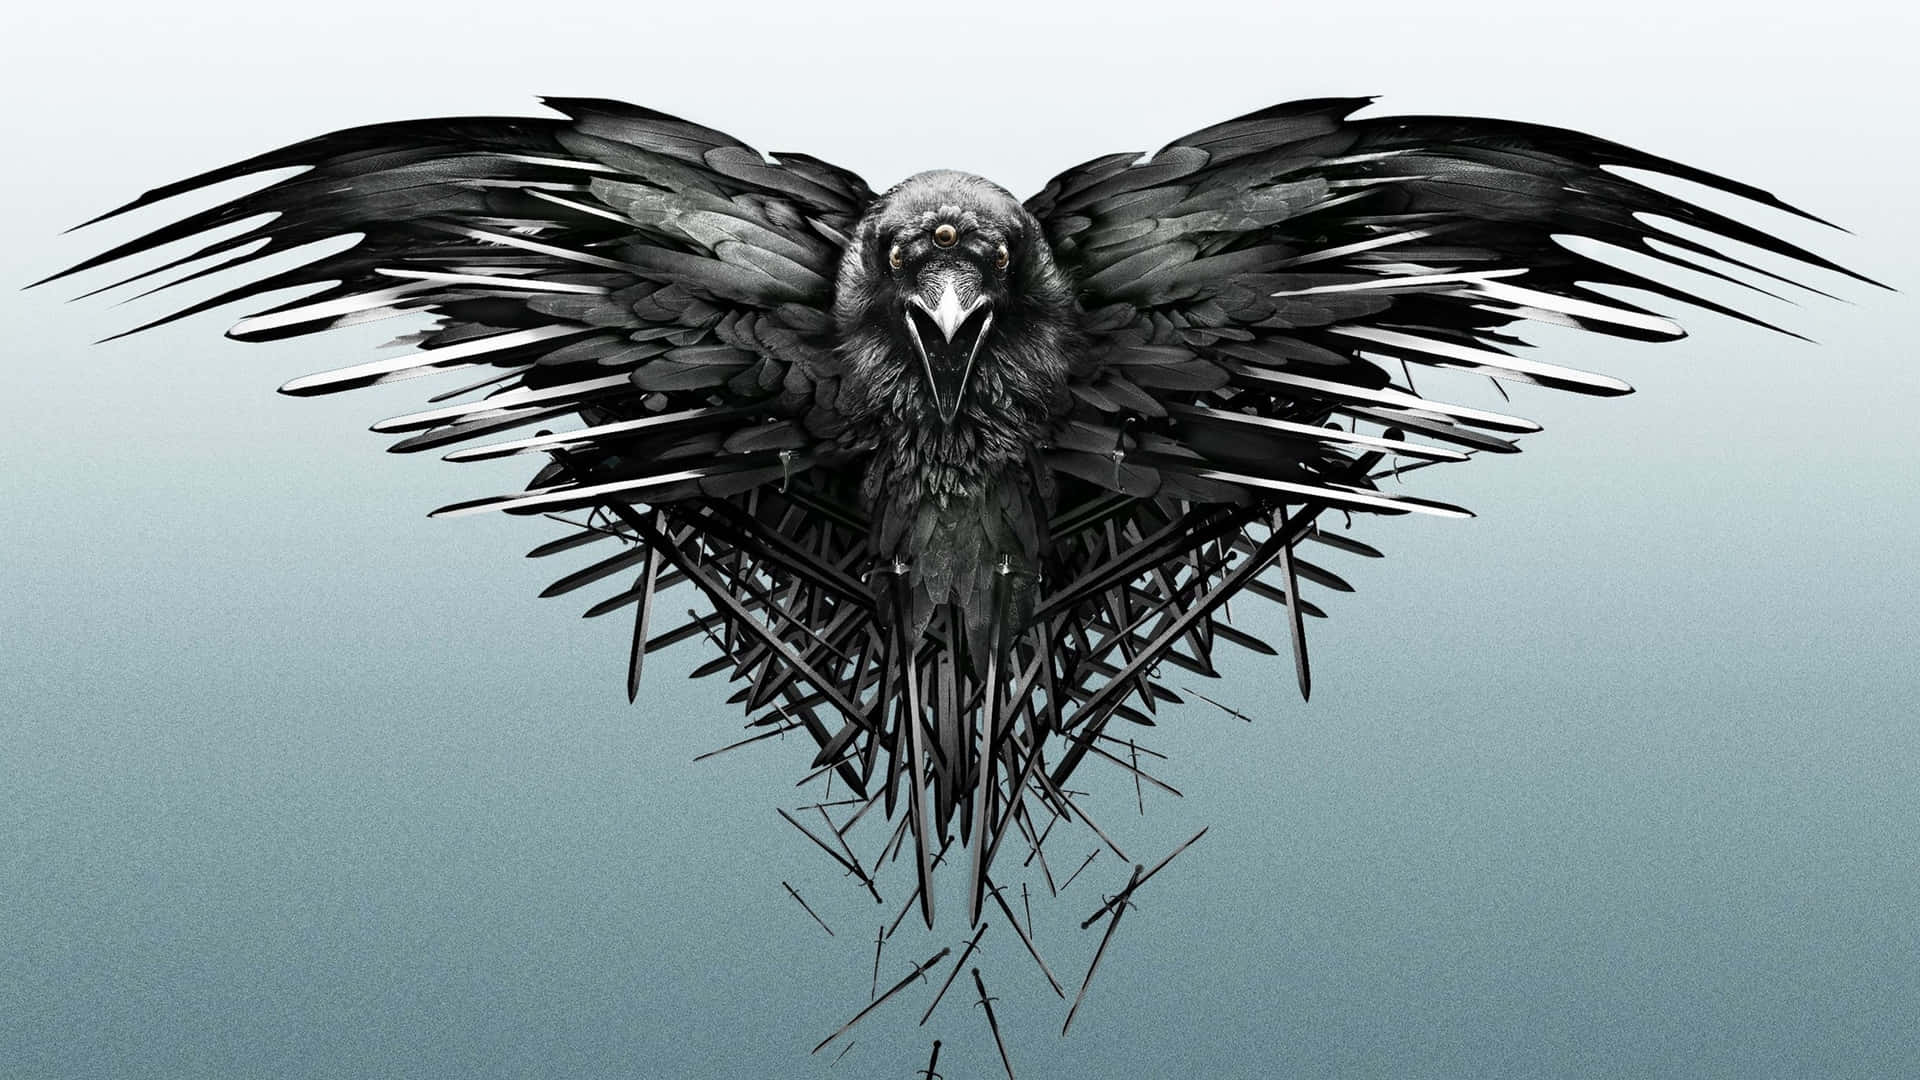 Game Of Thrones - Crow Background